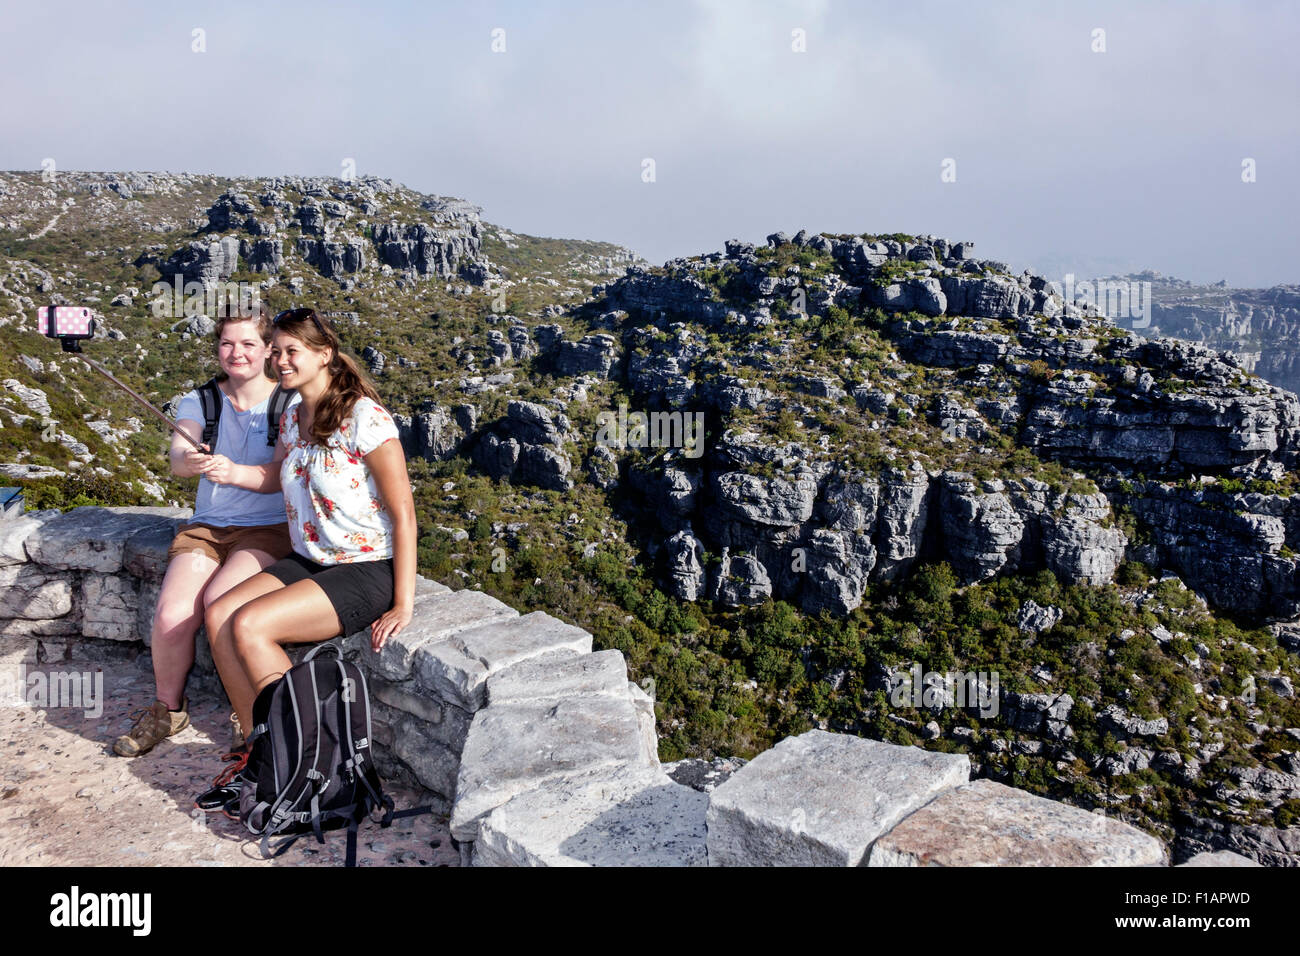 Cape Town South Africa,Table Mountain National Park,nature reserve,top,hiking,trail,overlook,woman female women,friends,hikers,selfie stick,smartphone Stock Photo